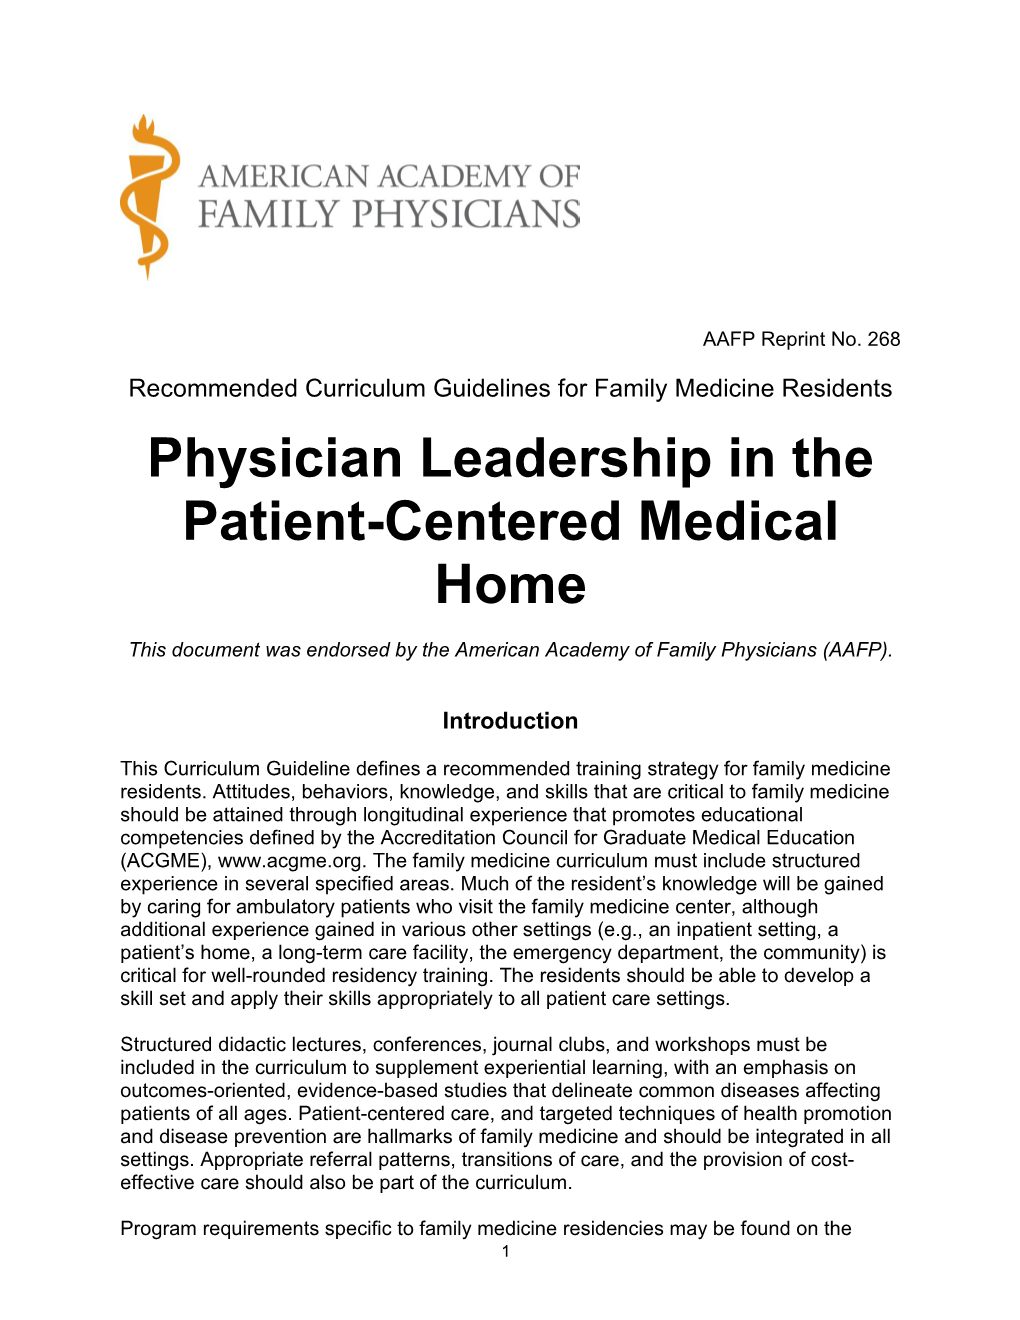 Recommended Curriculum Guideleines for Family Medicine Residents: Physician Leadership in the Patient-Centered Medical Home